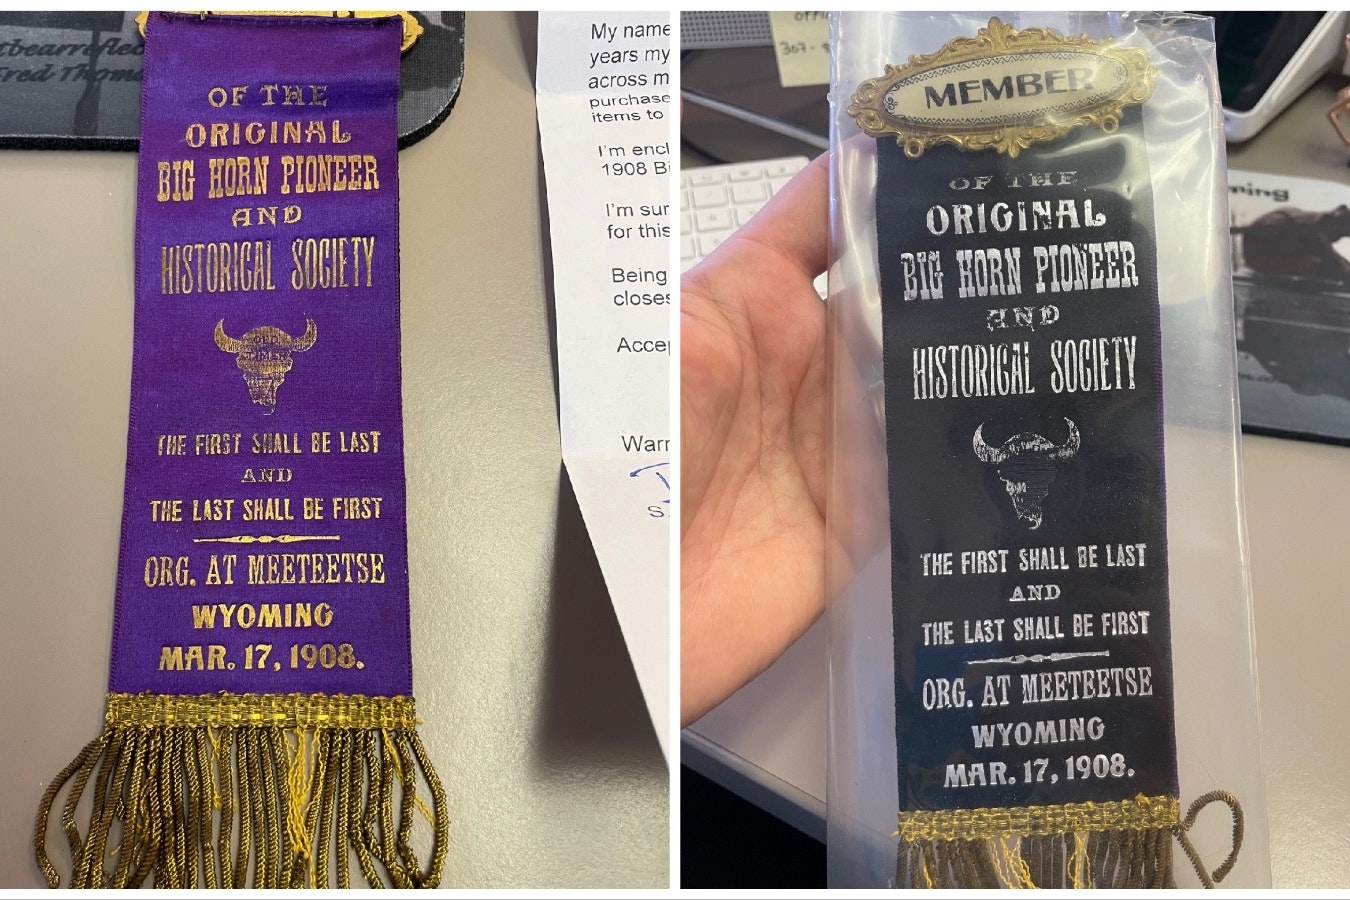 The two-sided ribbon was presented to a member of the Big Horn Pioneer and Historical Society, which "originated in Meeteetse" on March 17, 1908. It was donated to the Meeteetse community by the man who found it in a Texas storage unit.